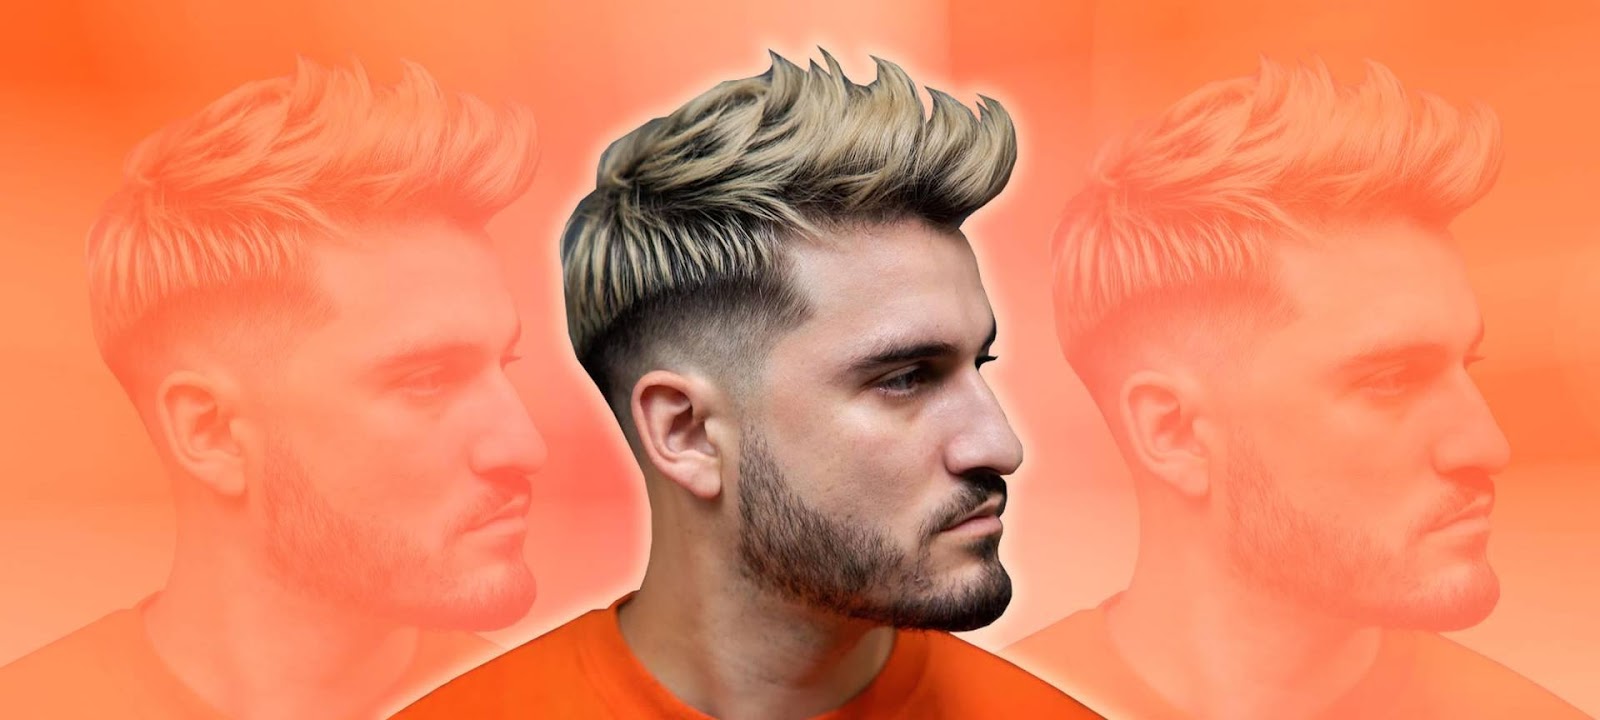 Difference Between a Low Fade and High Fade Haircut - L'Oréal Paris